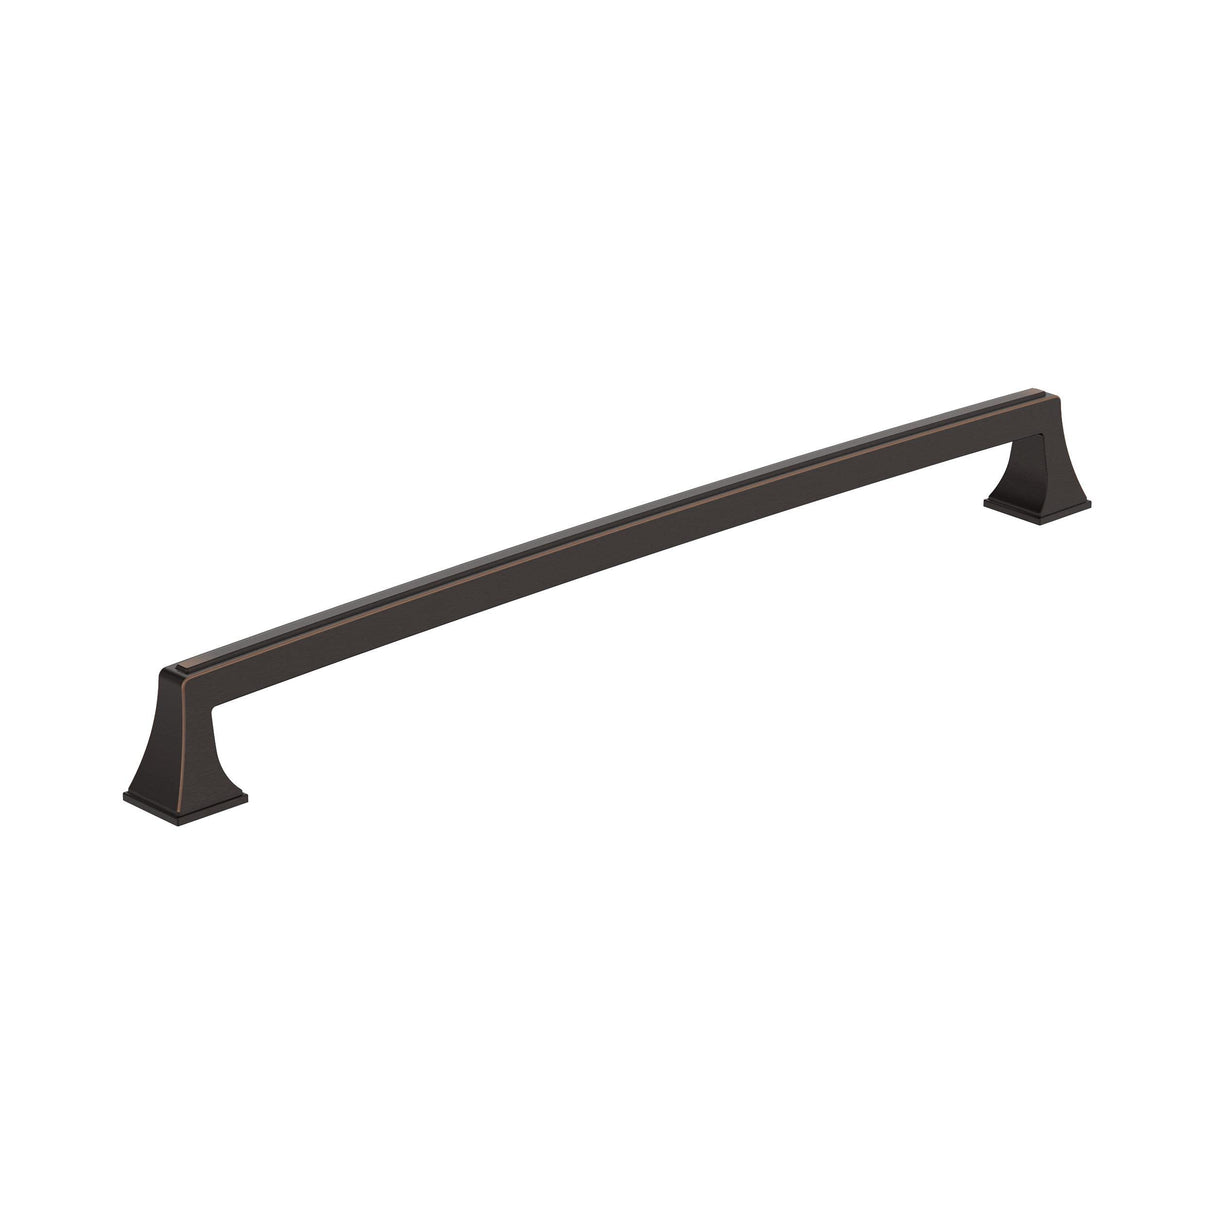 Amerock BP53537ORB Oil Rubbed Bronze Cabinet Pull 12-5/8 in (320 mm) Center-to-Center Cabinet Handle Mulholland Drawer Pull Kitchen Cabinet Handle Furniture Hardware